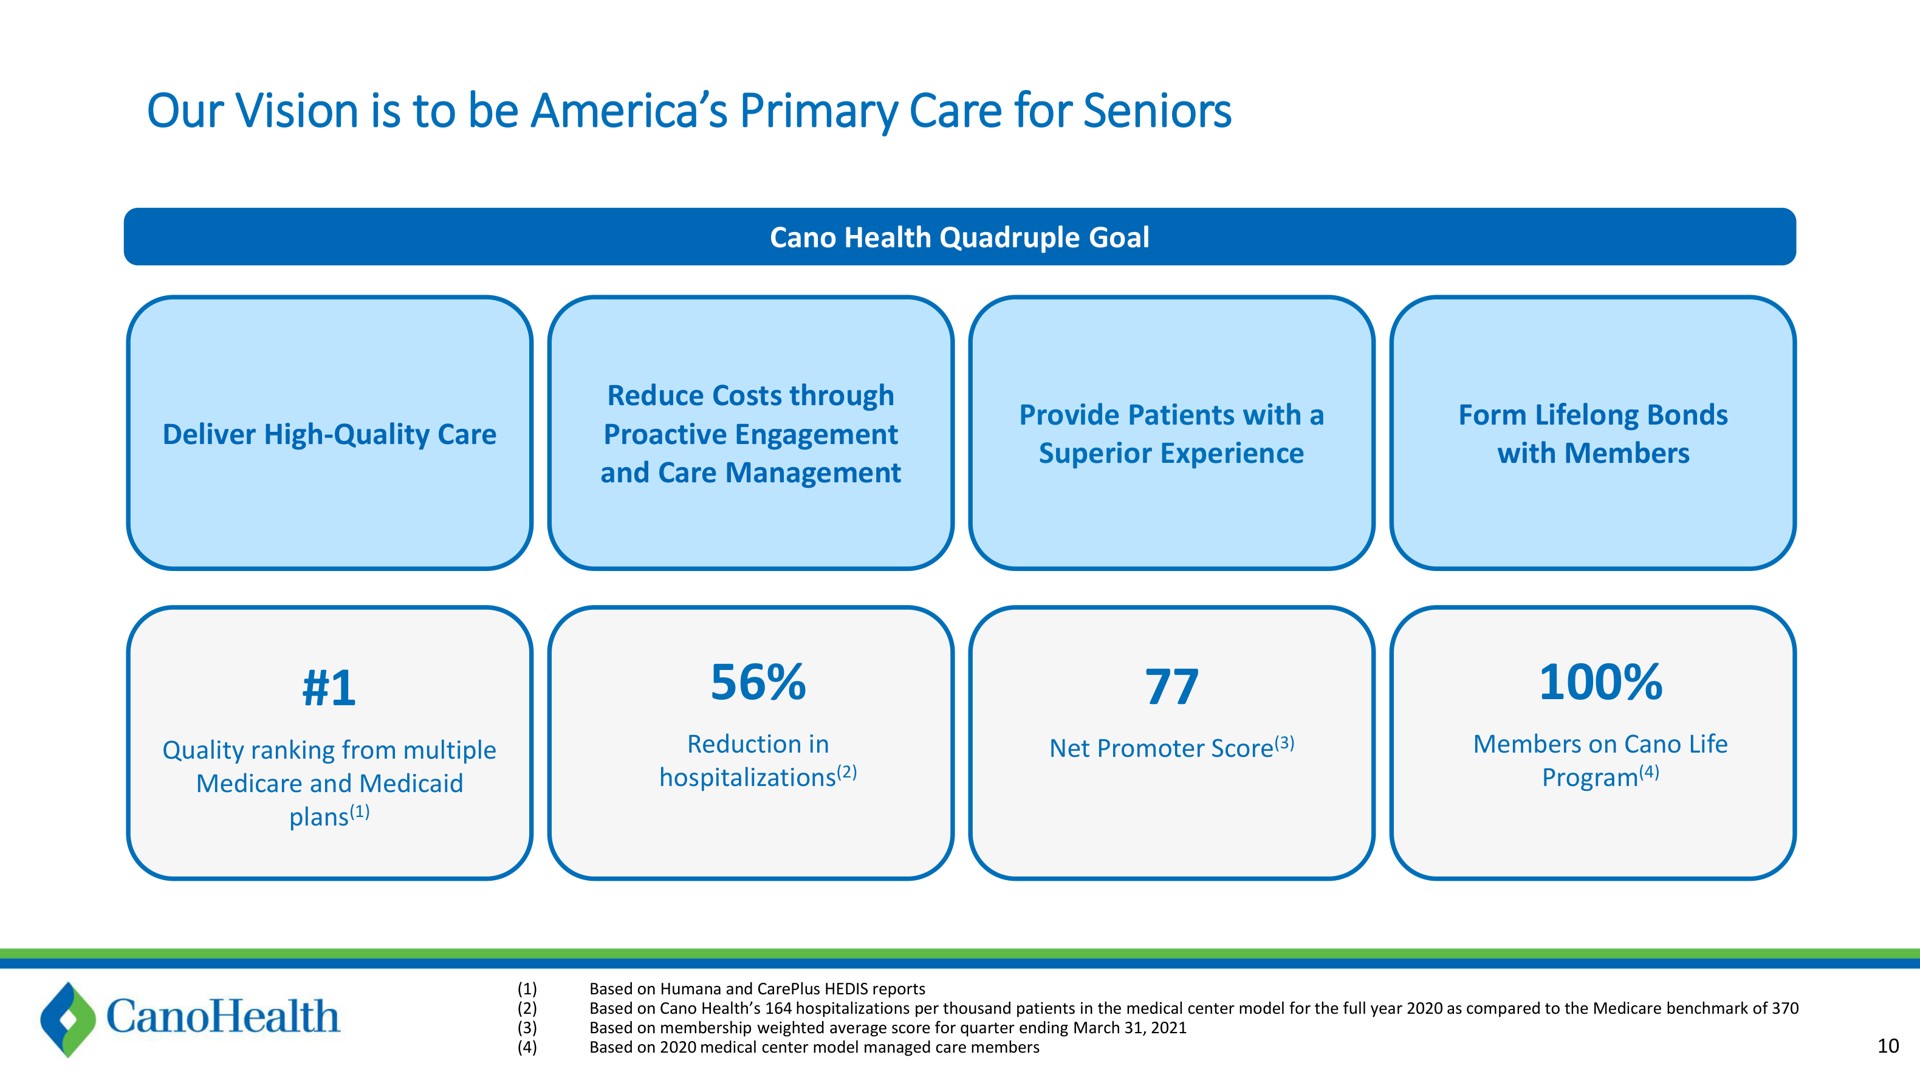 our vision is to be primary care for seniors | Cano Health